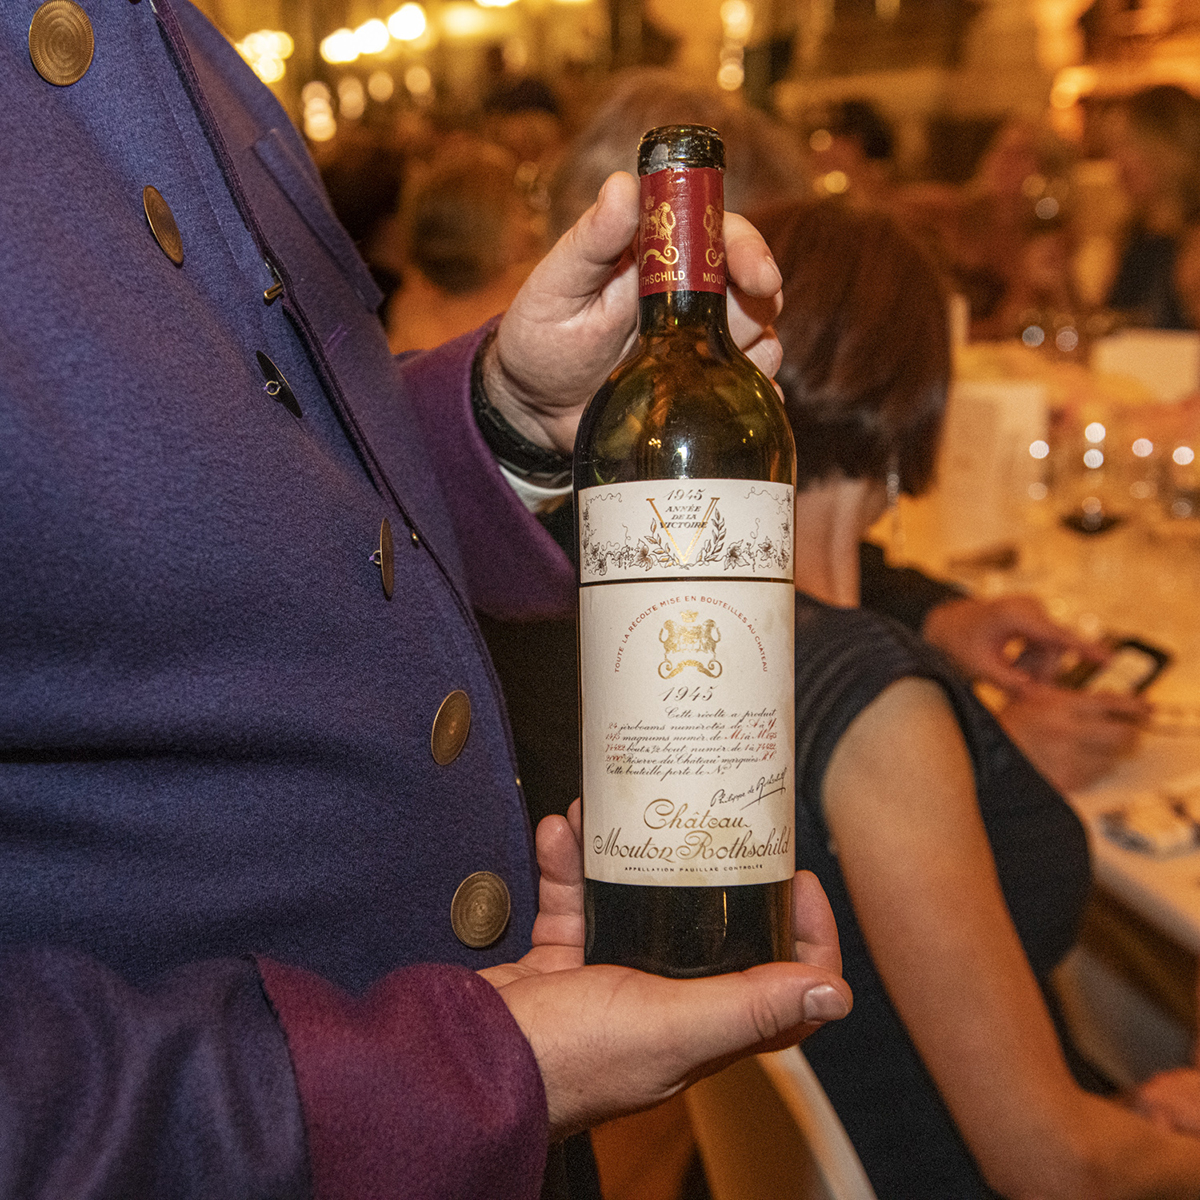 Bottle of vintage wine held by a waiter